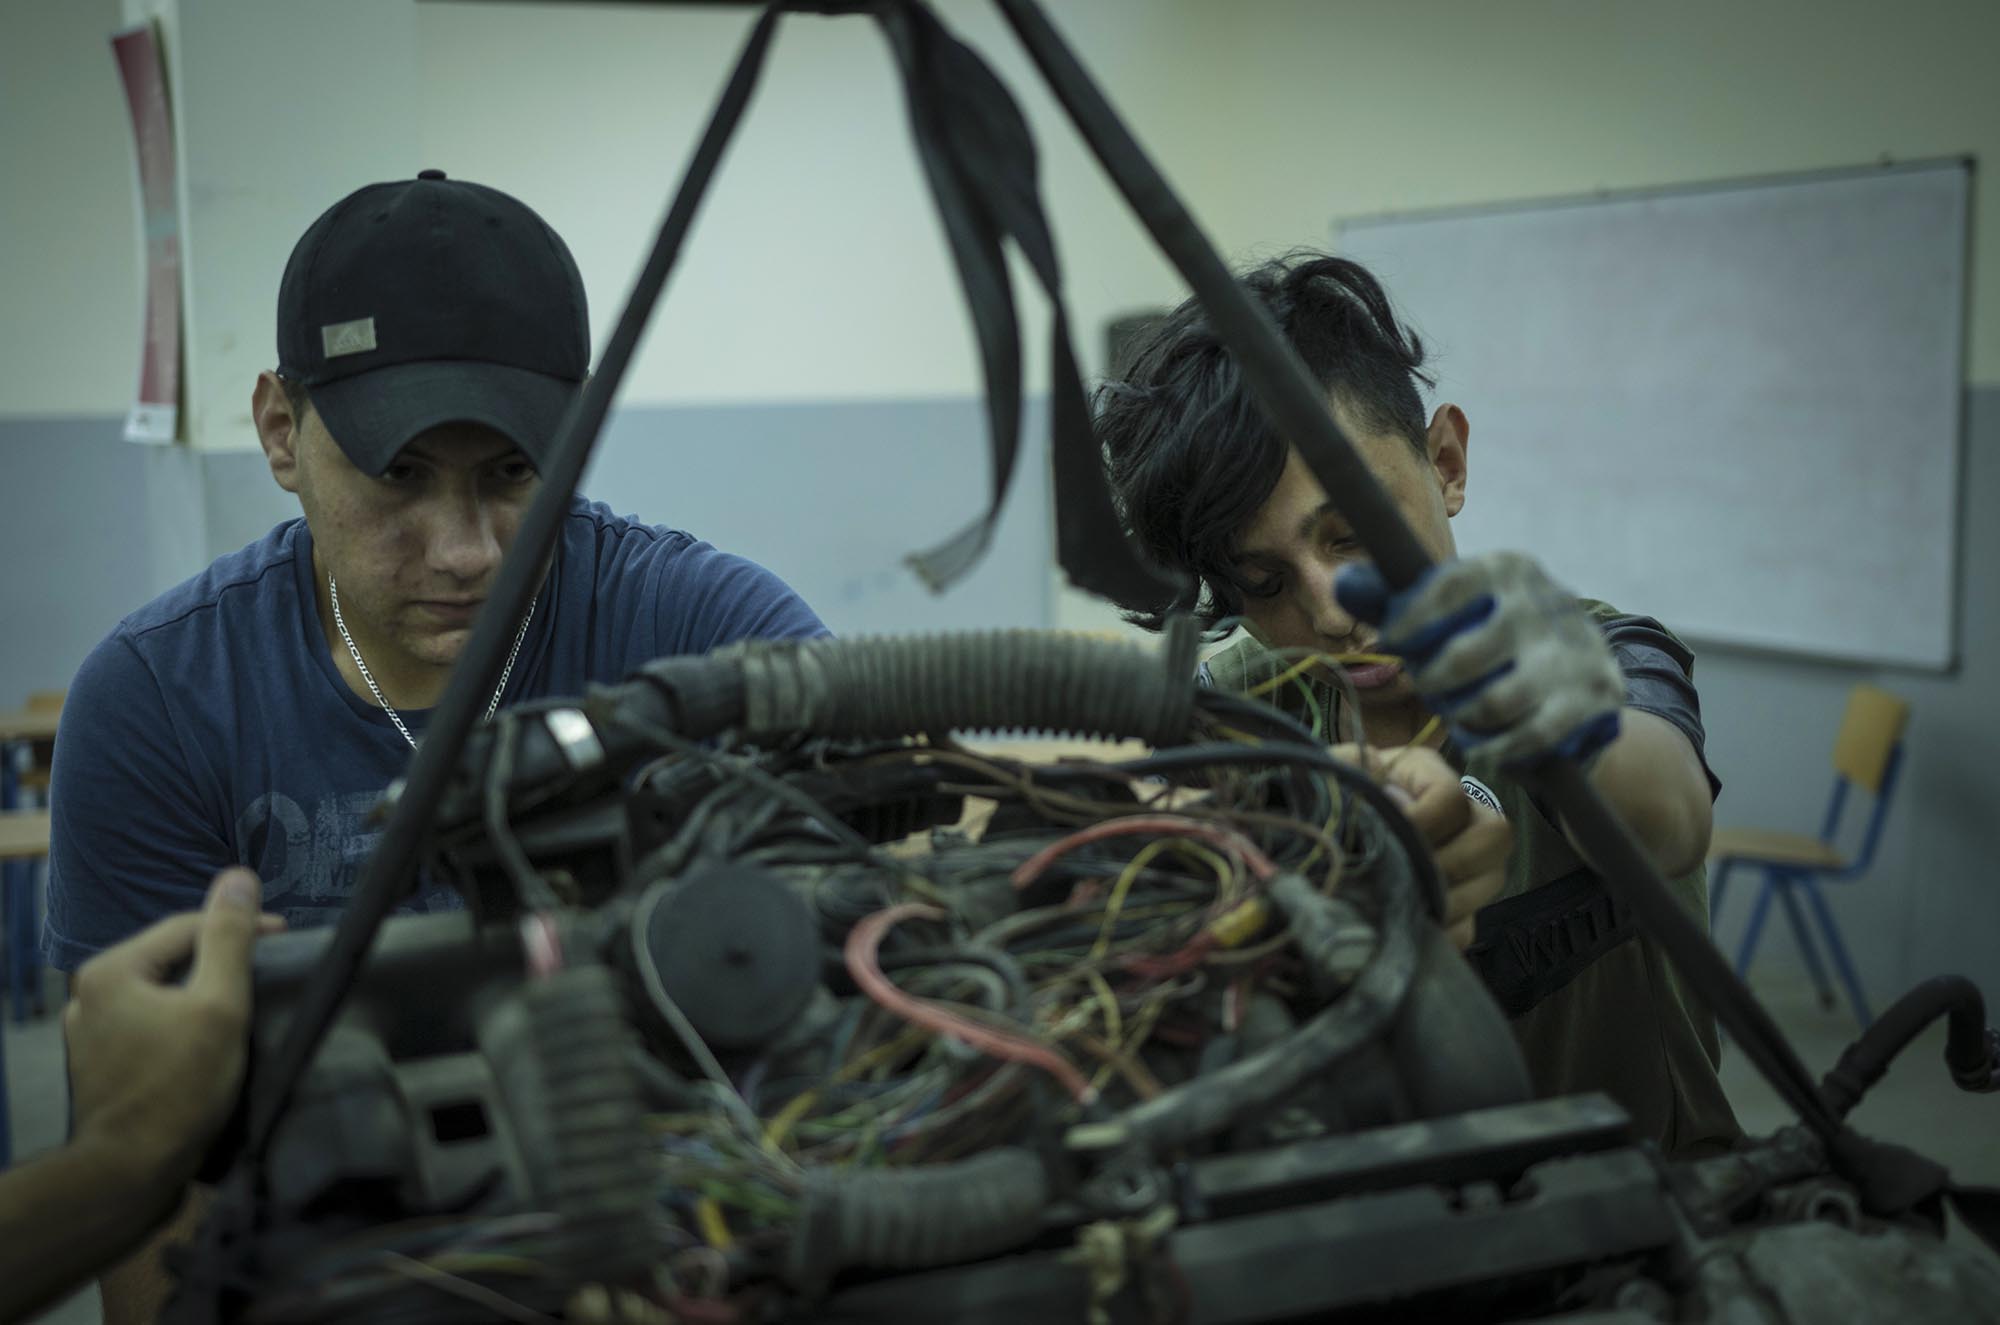 Young men enroll in Anera's mechanics courses for refugee youth in Lebanon.